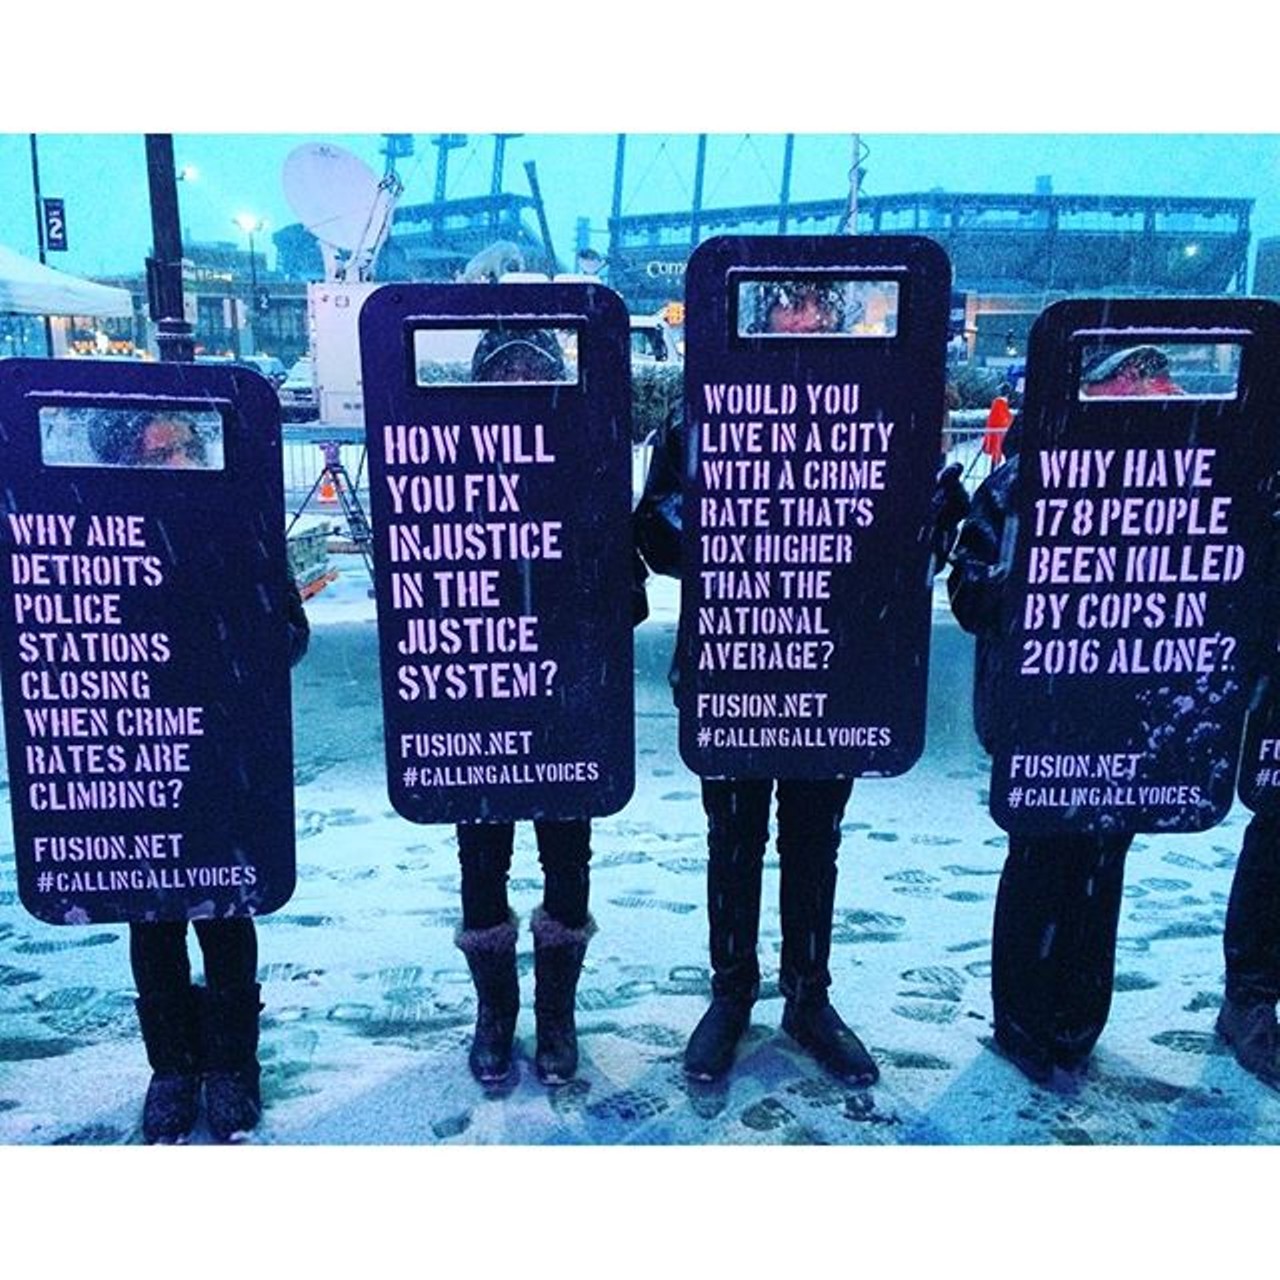 Each riot shield contained a question, challenging the candidates to take a stand on issues of public safety and criminal justice reform&#133; subjects that were notably absent from the discussion going on inside. Photo via Instagram user @ra_meen